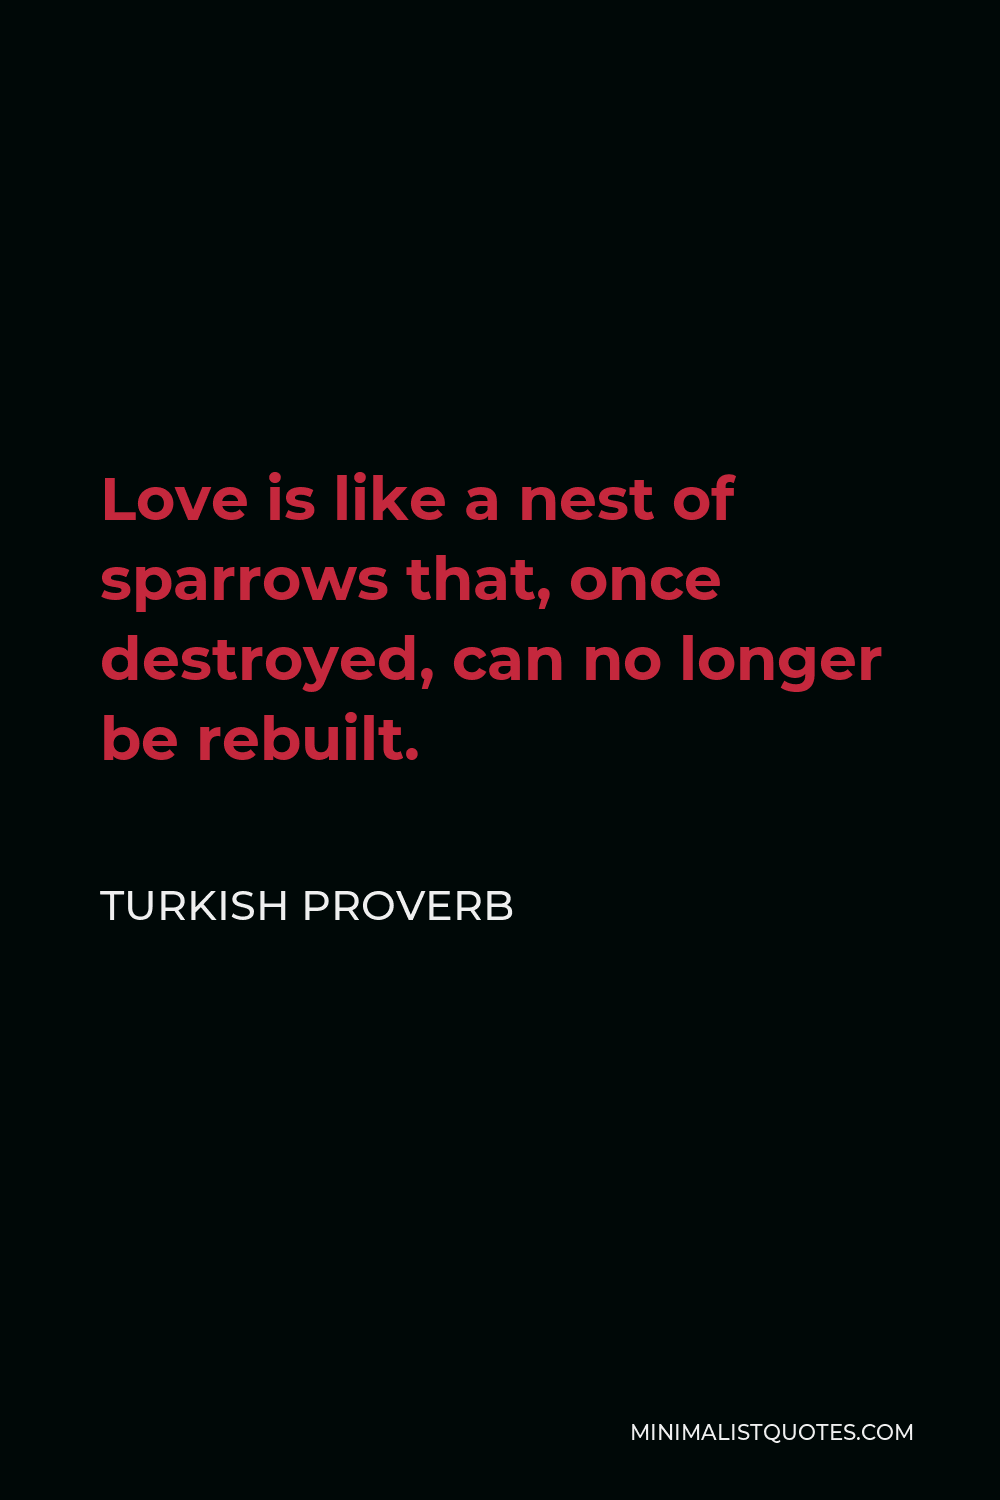 Turkish Proverb Quote - Love is like a nest of sparrows that, once destroyed, can no longer be rebuilt.